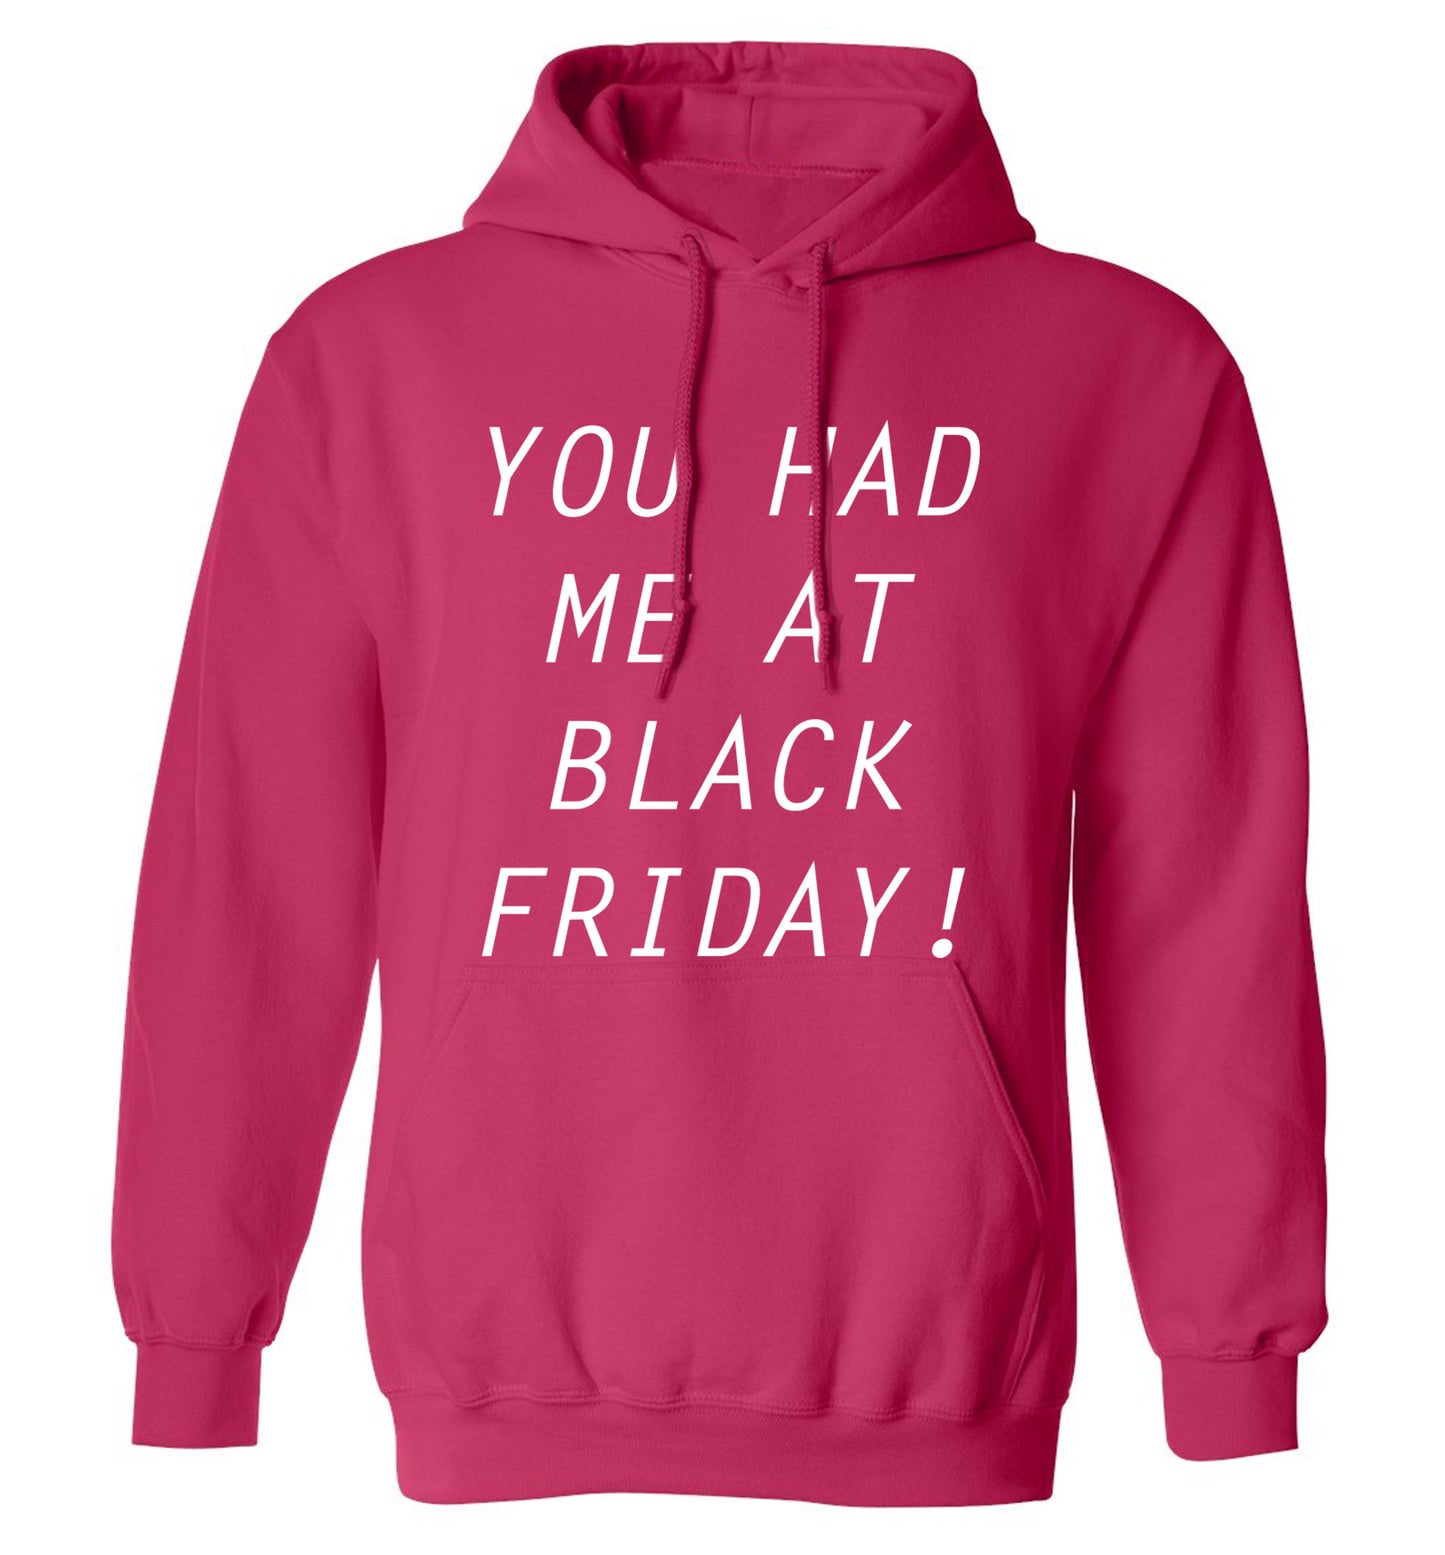 You had me at black friday adults unisex pink hoodie 2XL